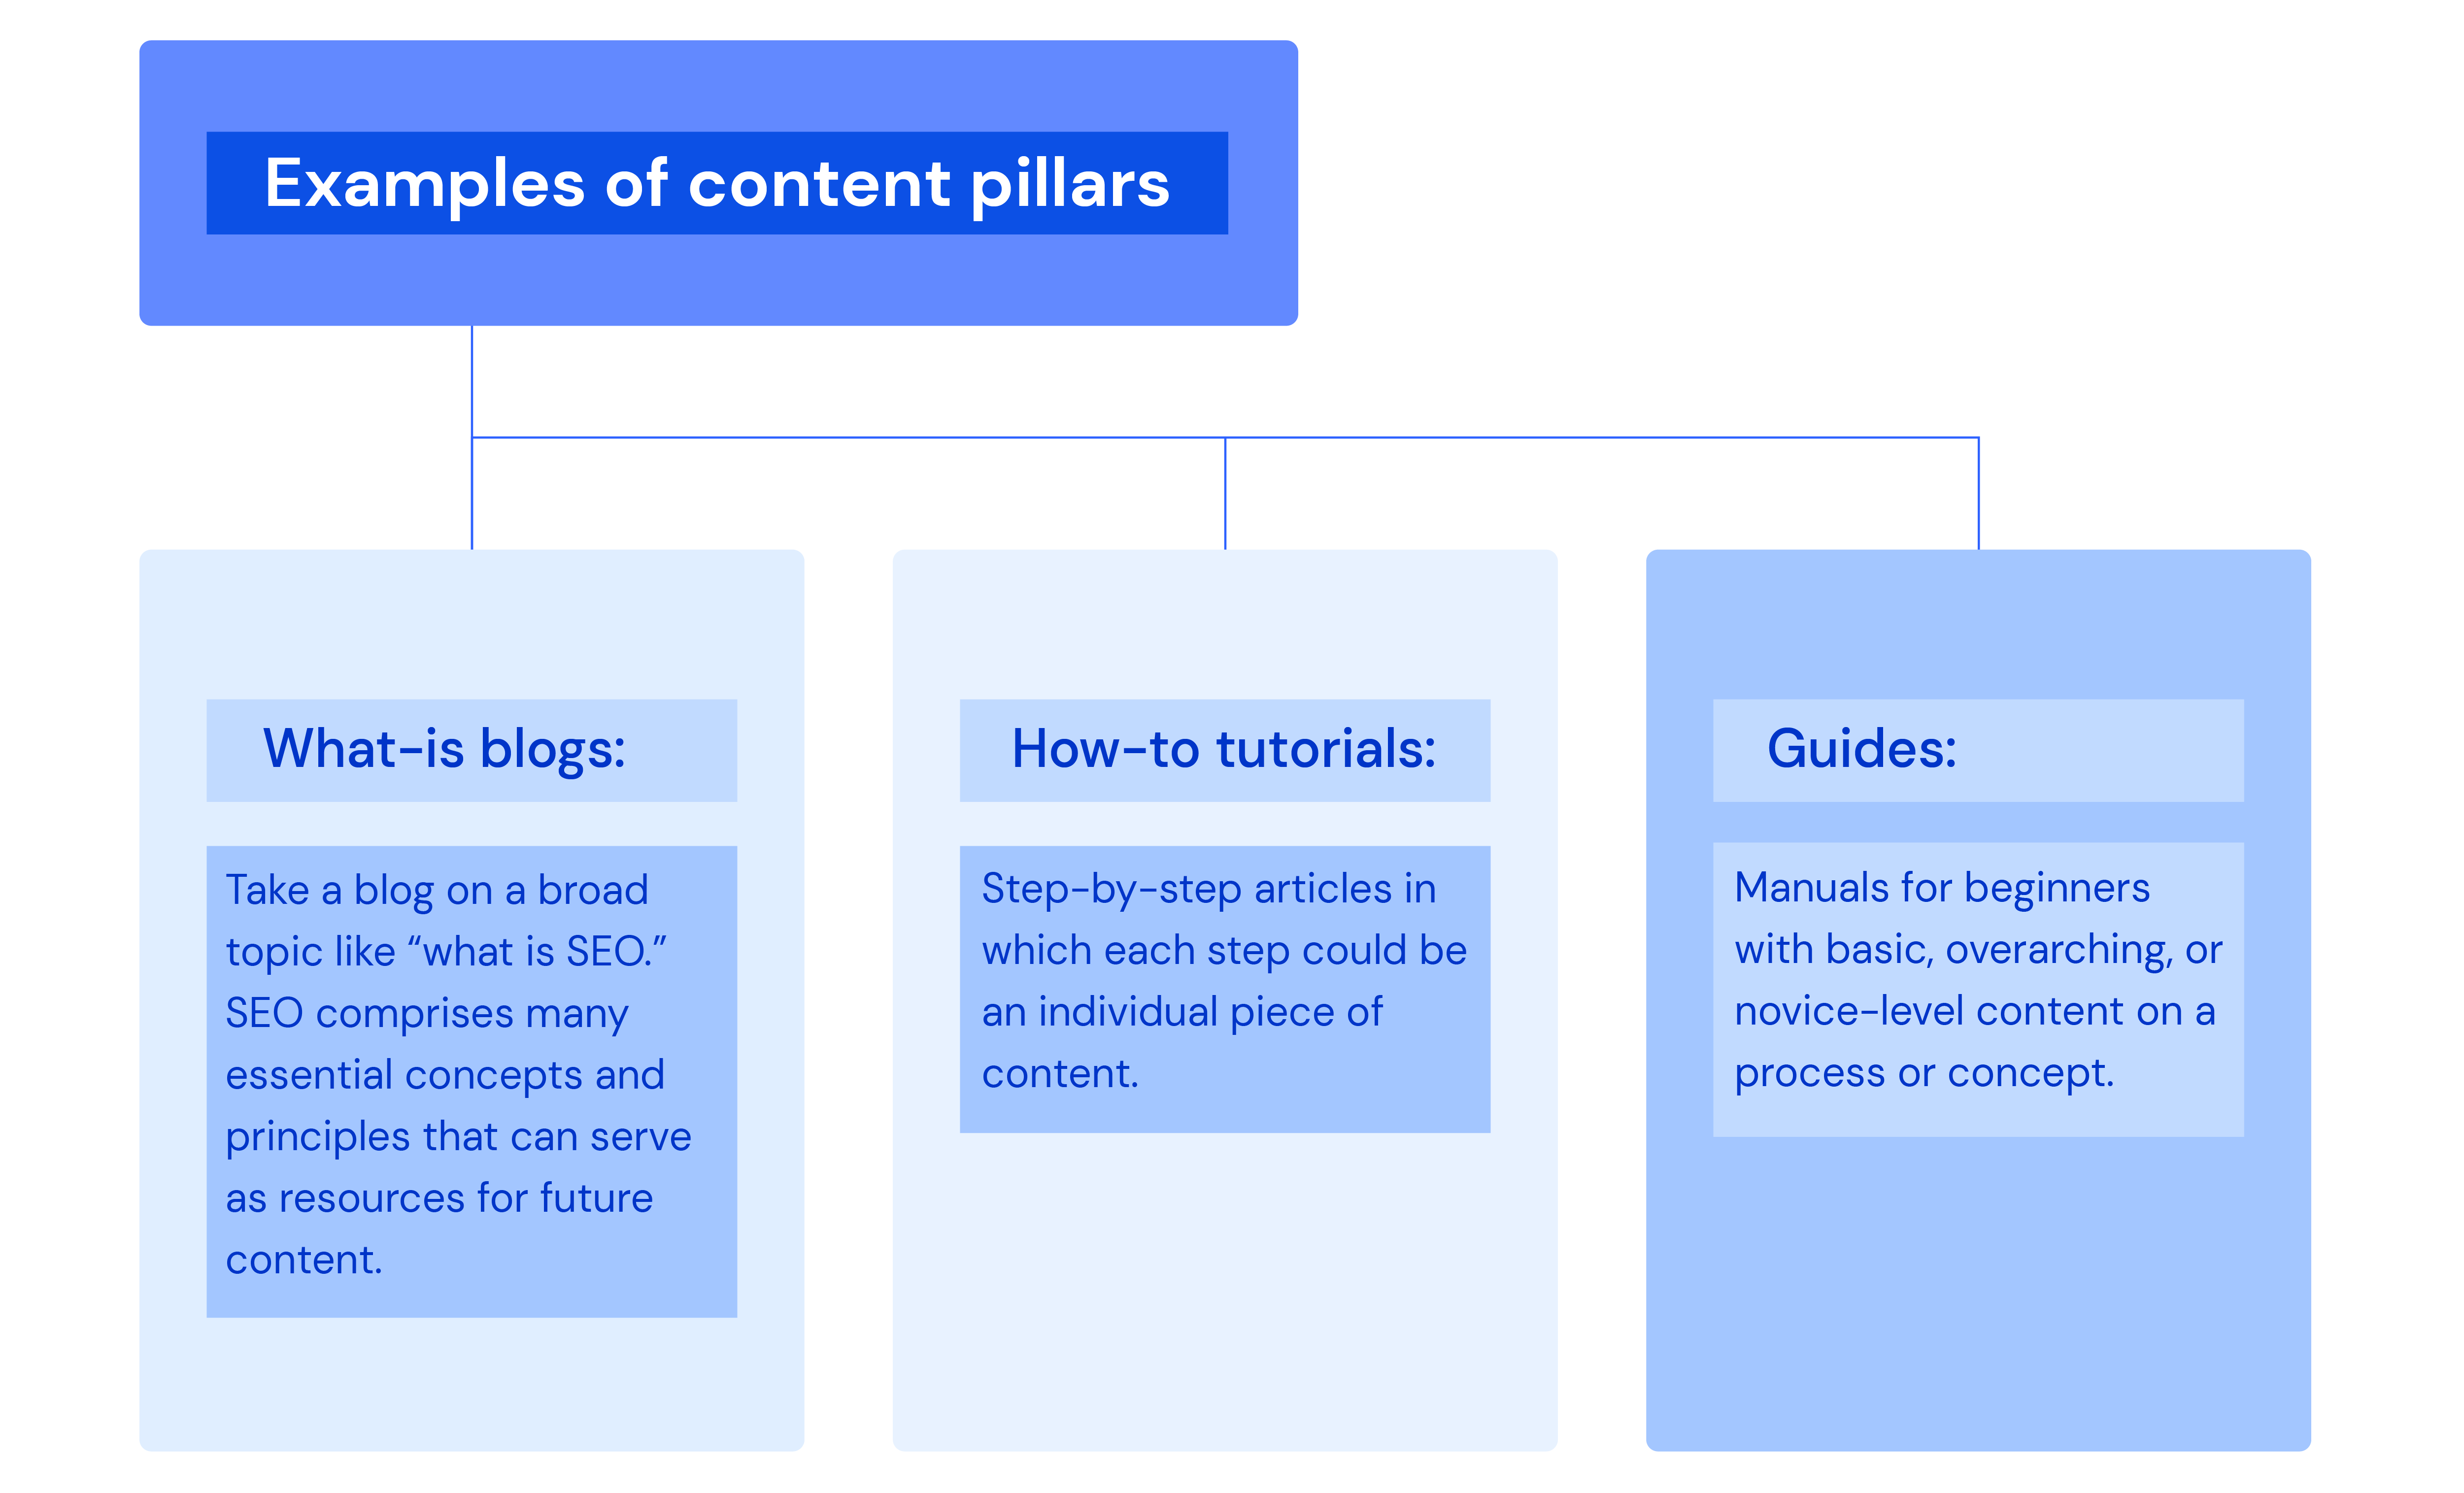 Examples of content pillars